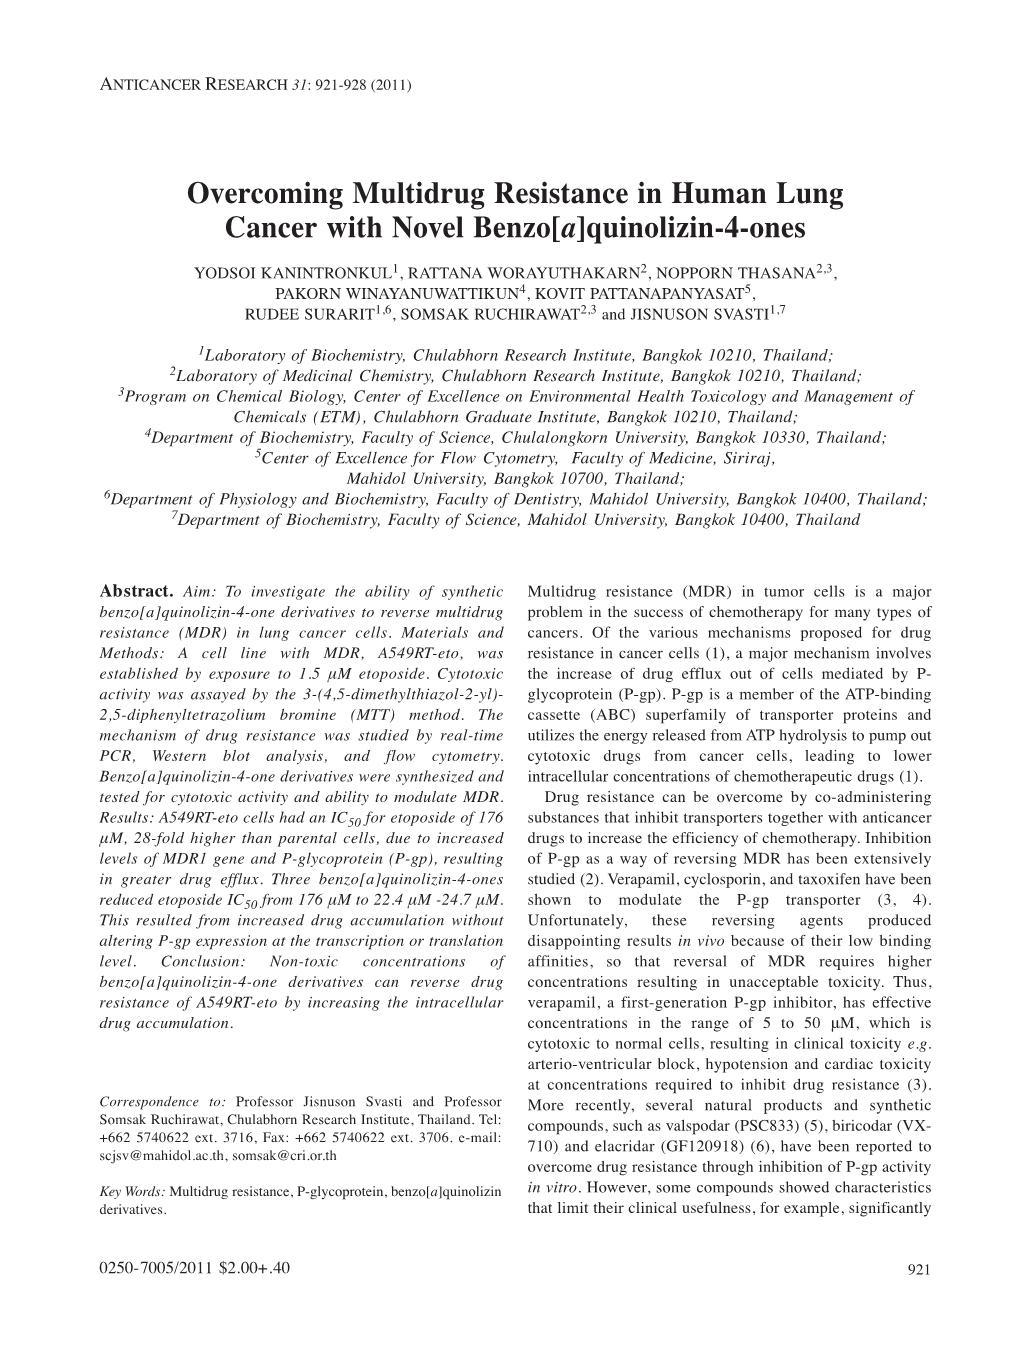 Overcoming Multidrug Resistance in Human Lung Cancer with Novel Benzo[A]Quinolizin-4-Ones